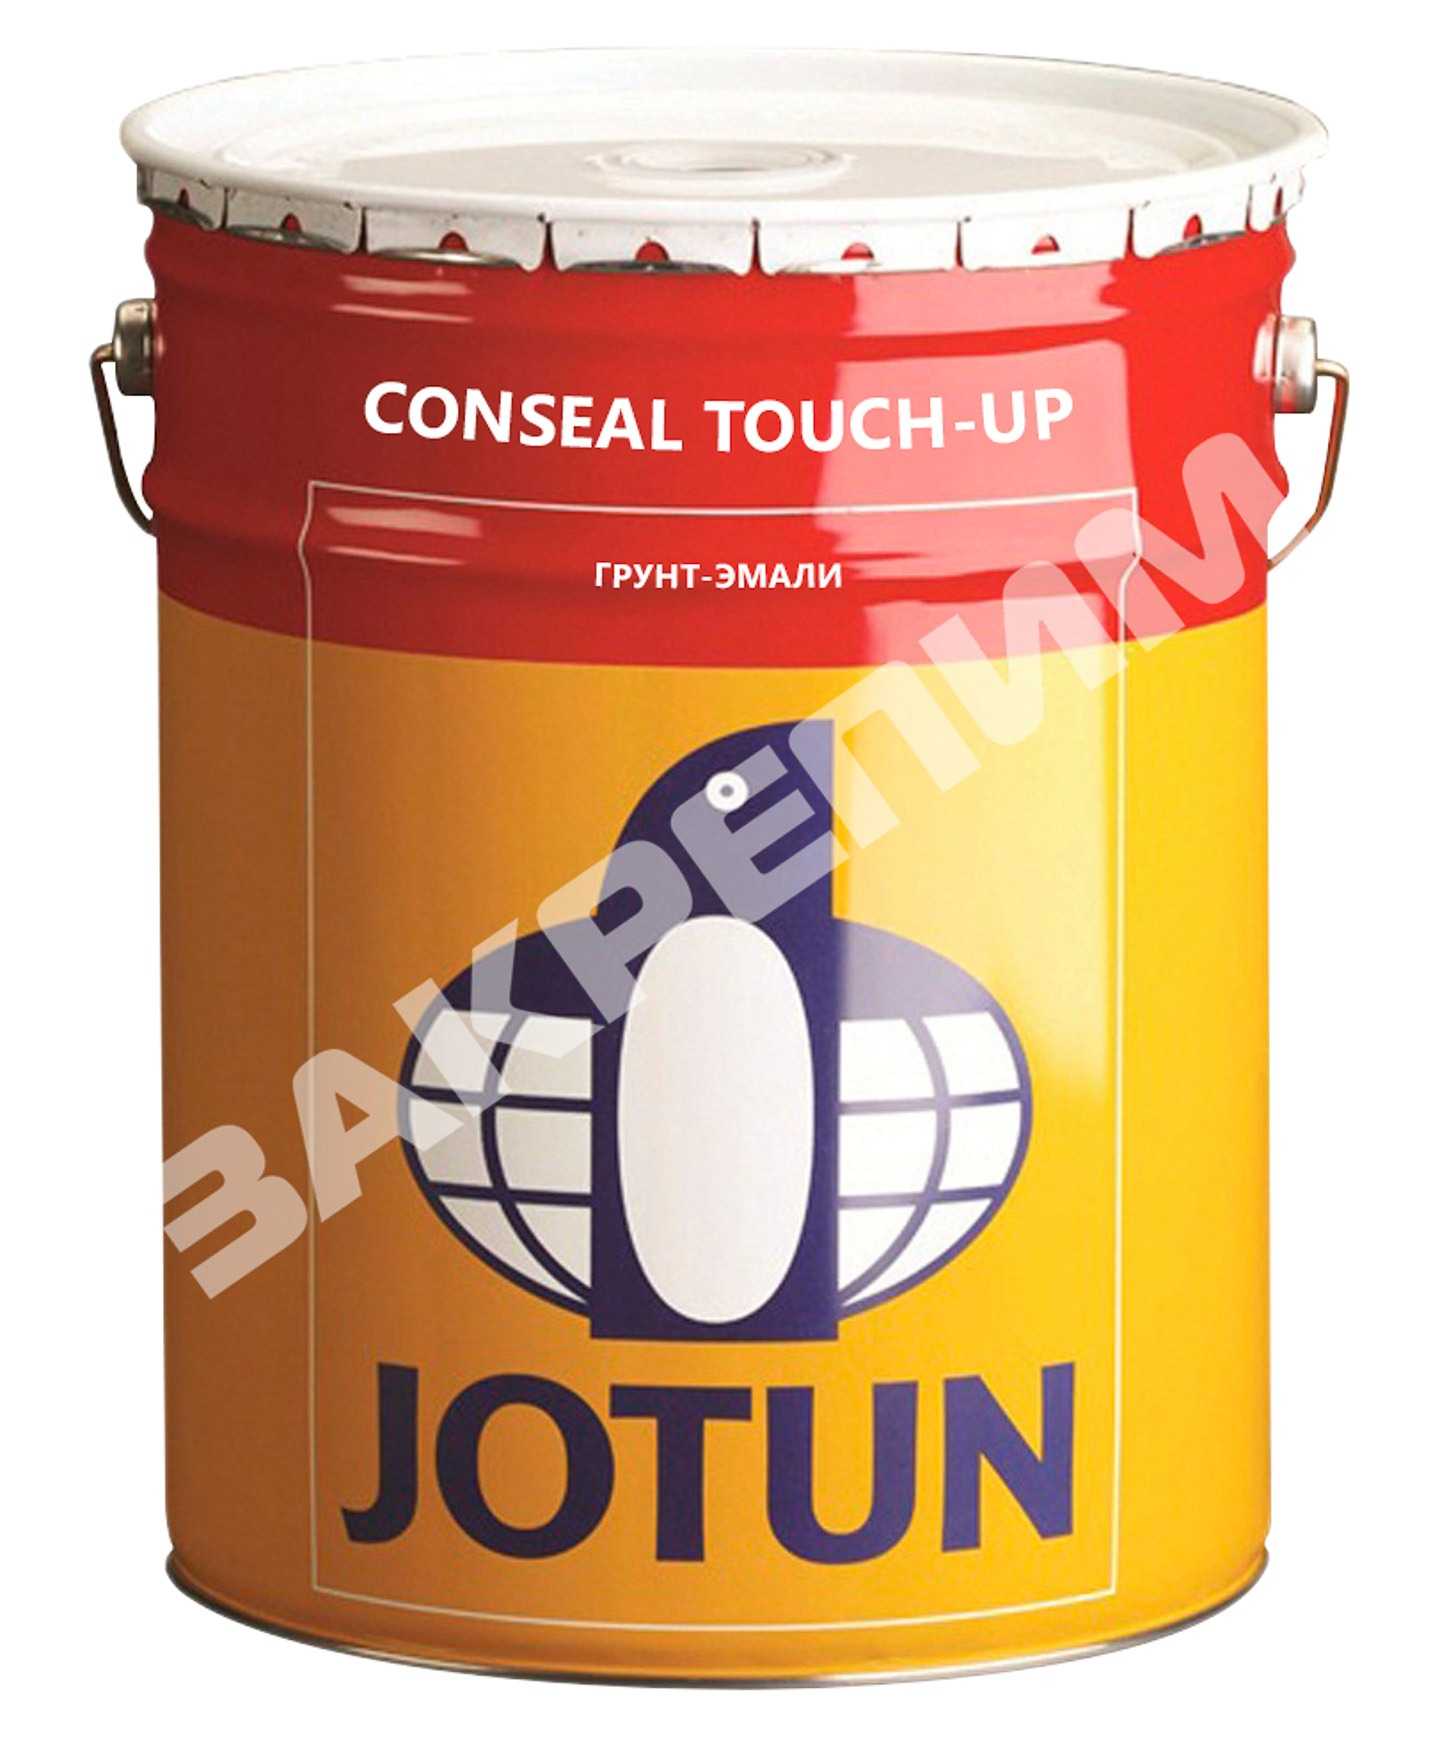 Conseal-Touch-Up